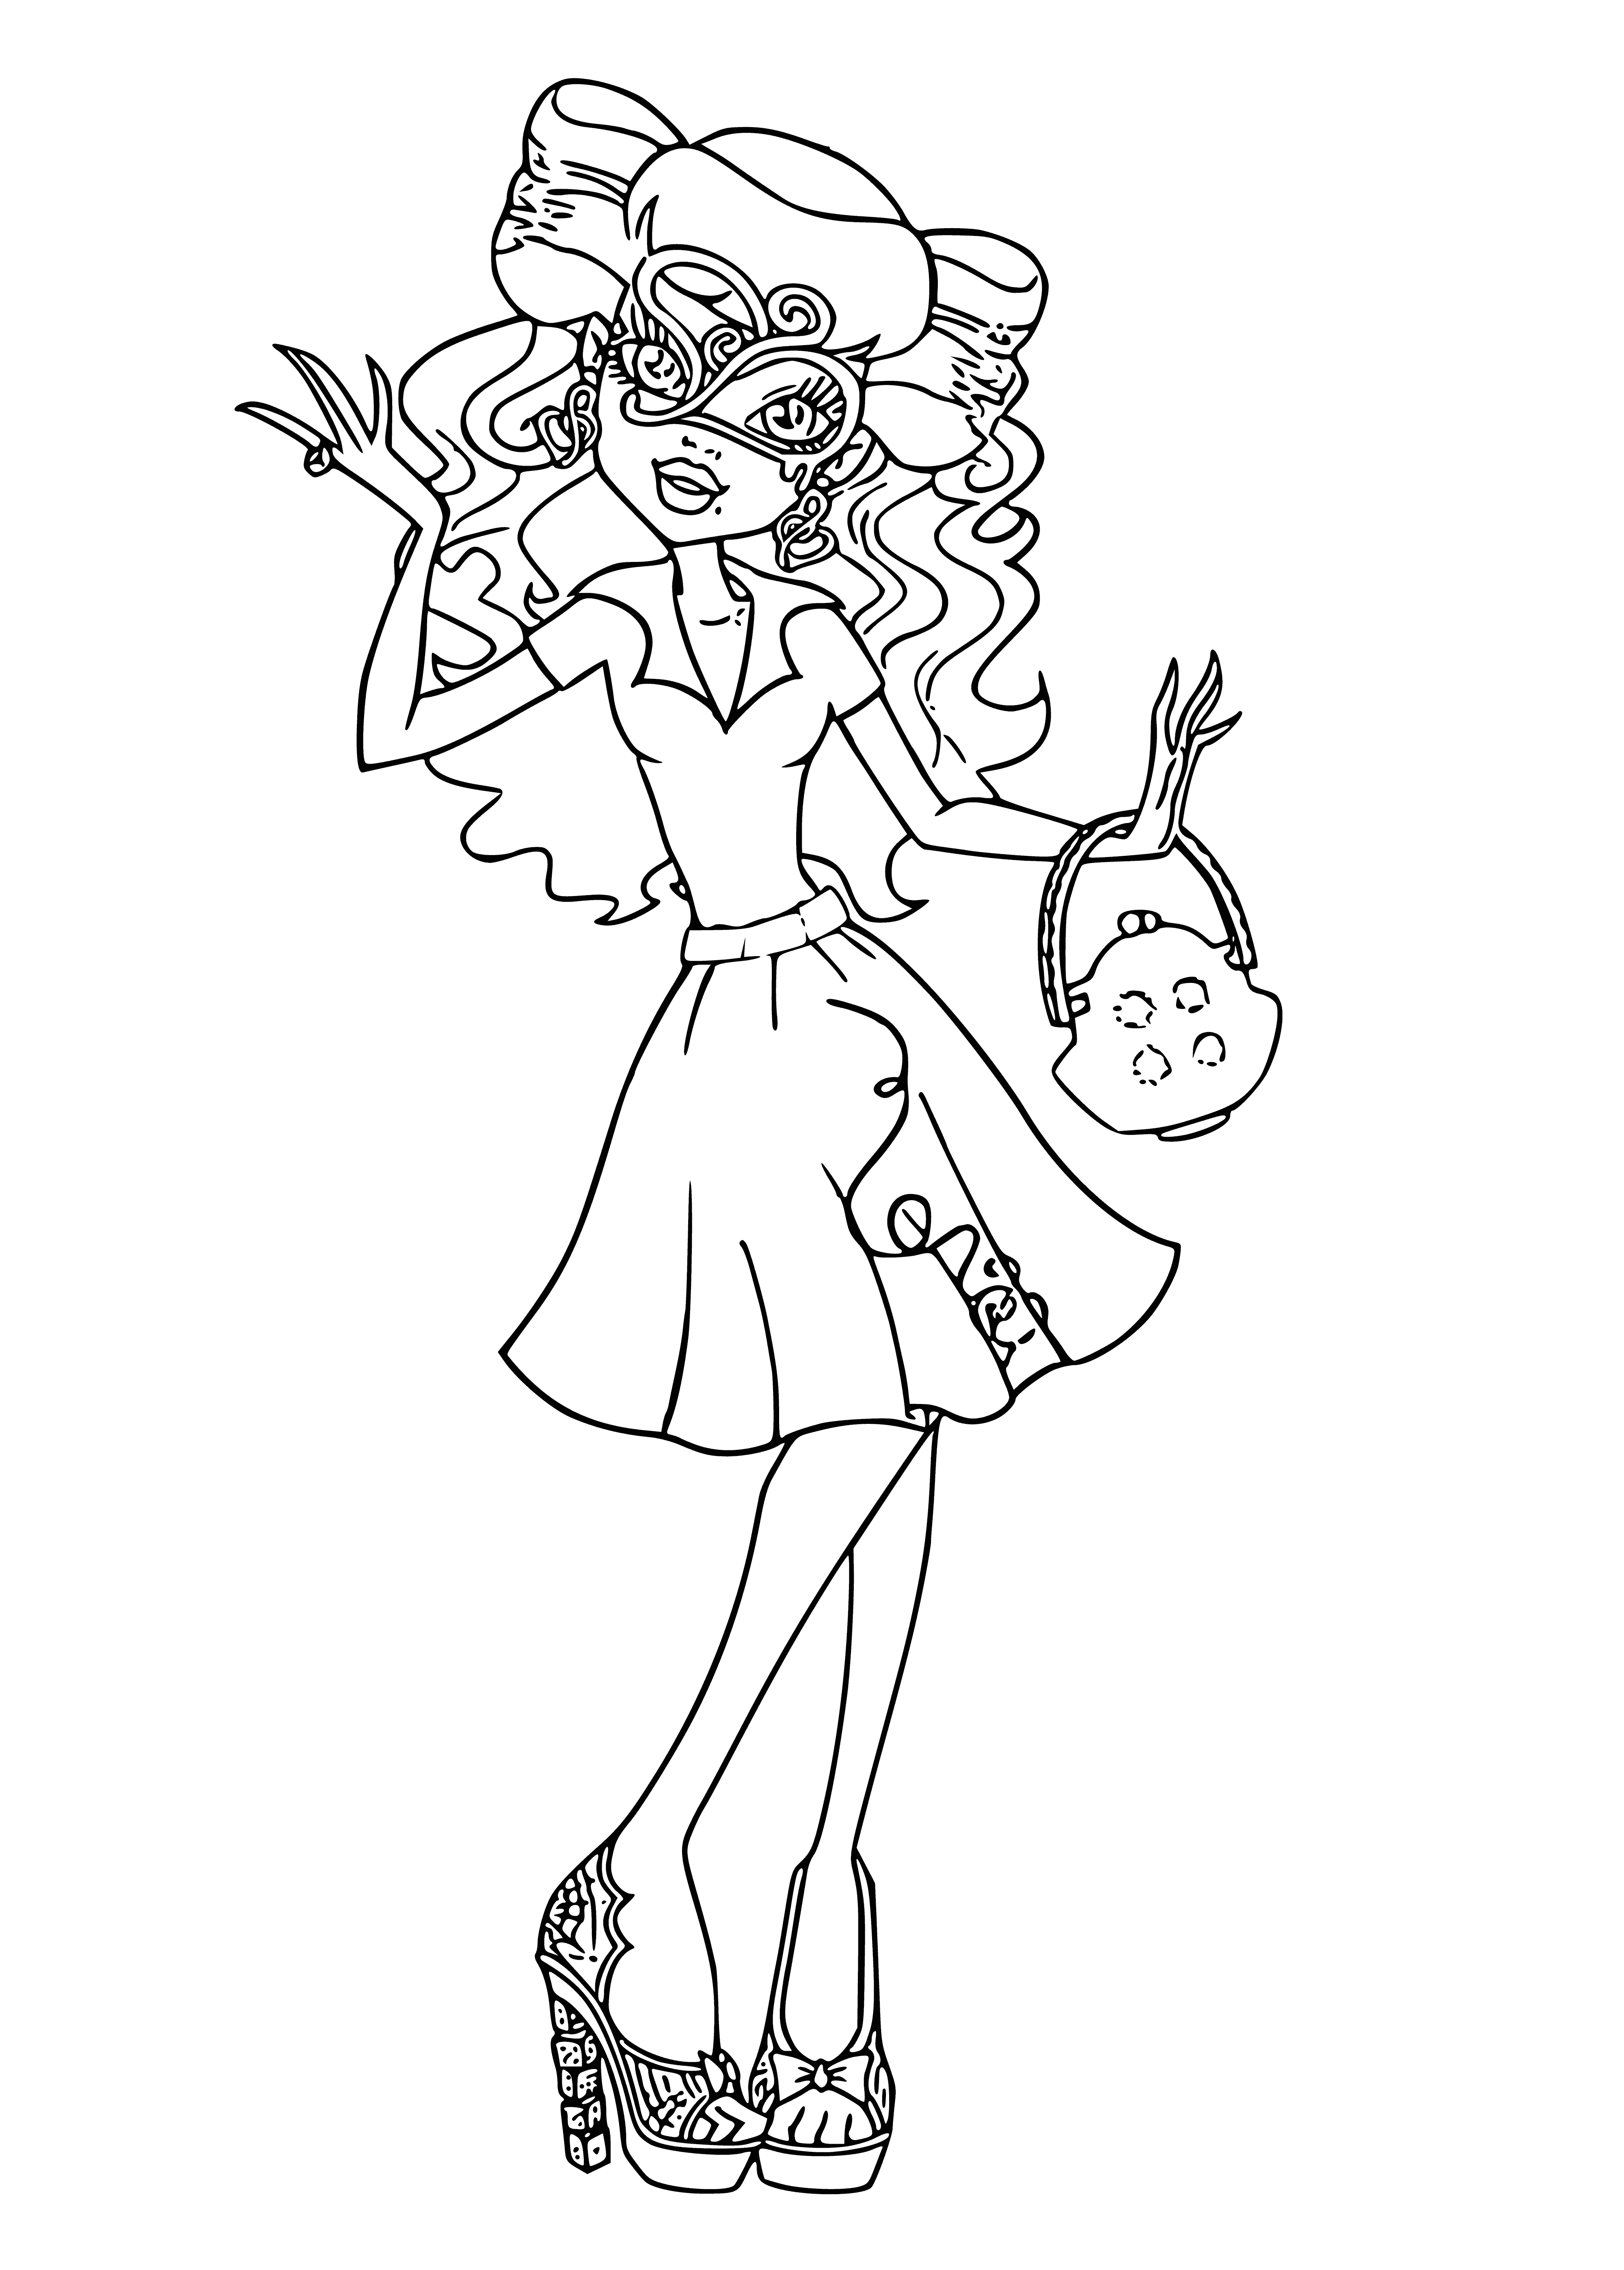 coloring page: The Operetta is the Phantom’s daughter, beautiful with long blonde hair, white dress & blue sash. She holds a blue flower in her hand. #Opera